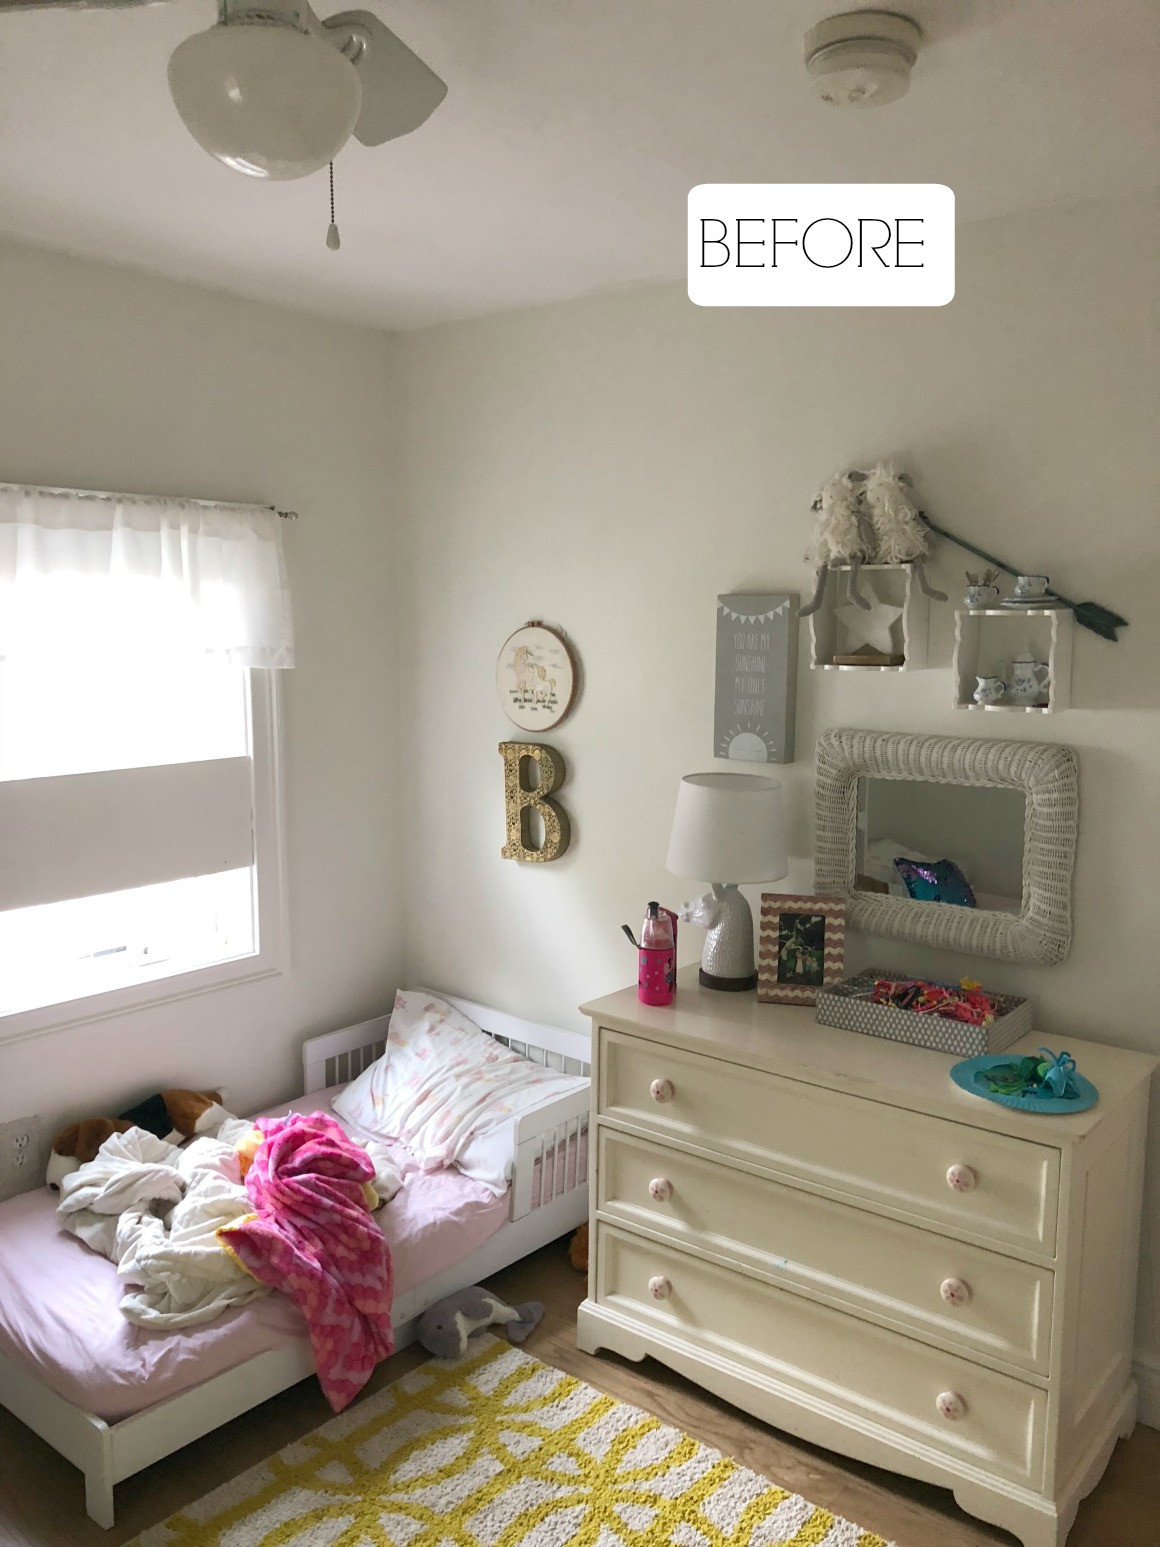 Girl Bedroom Wallpaper
 Small Girls Bedroom Makeover with Wallpaper Accent Wall